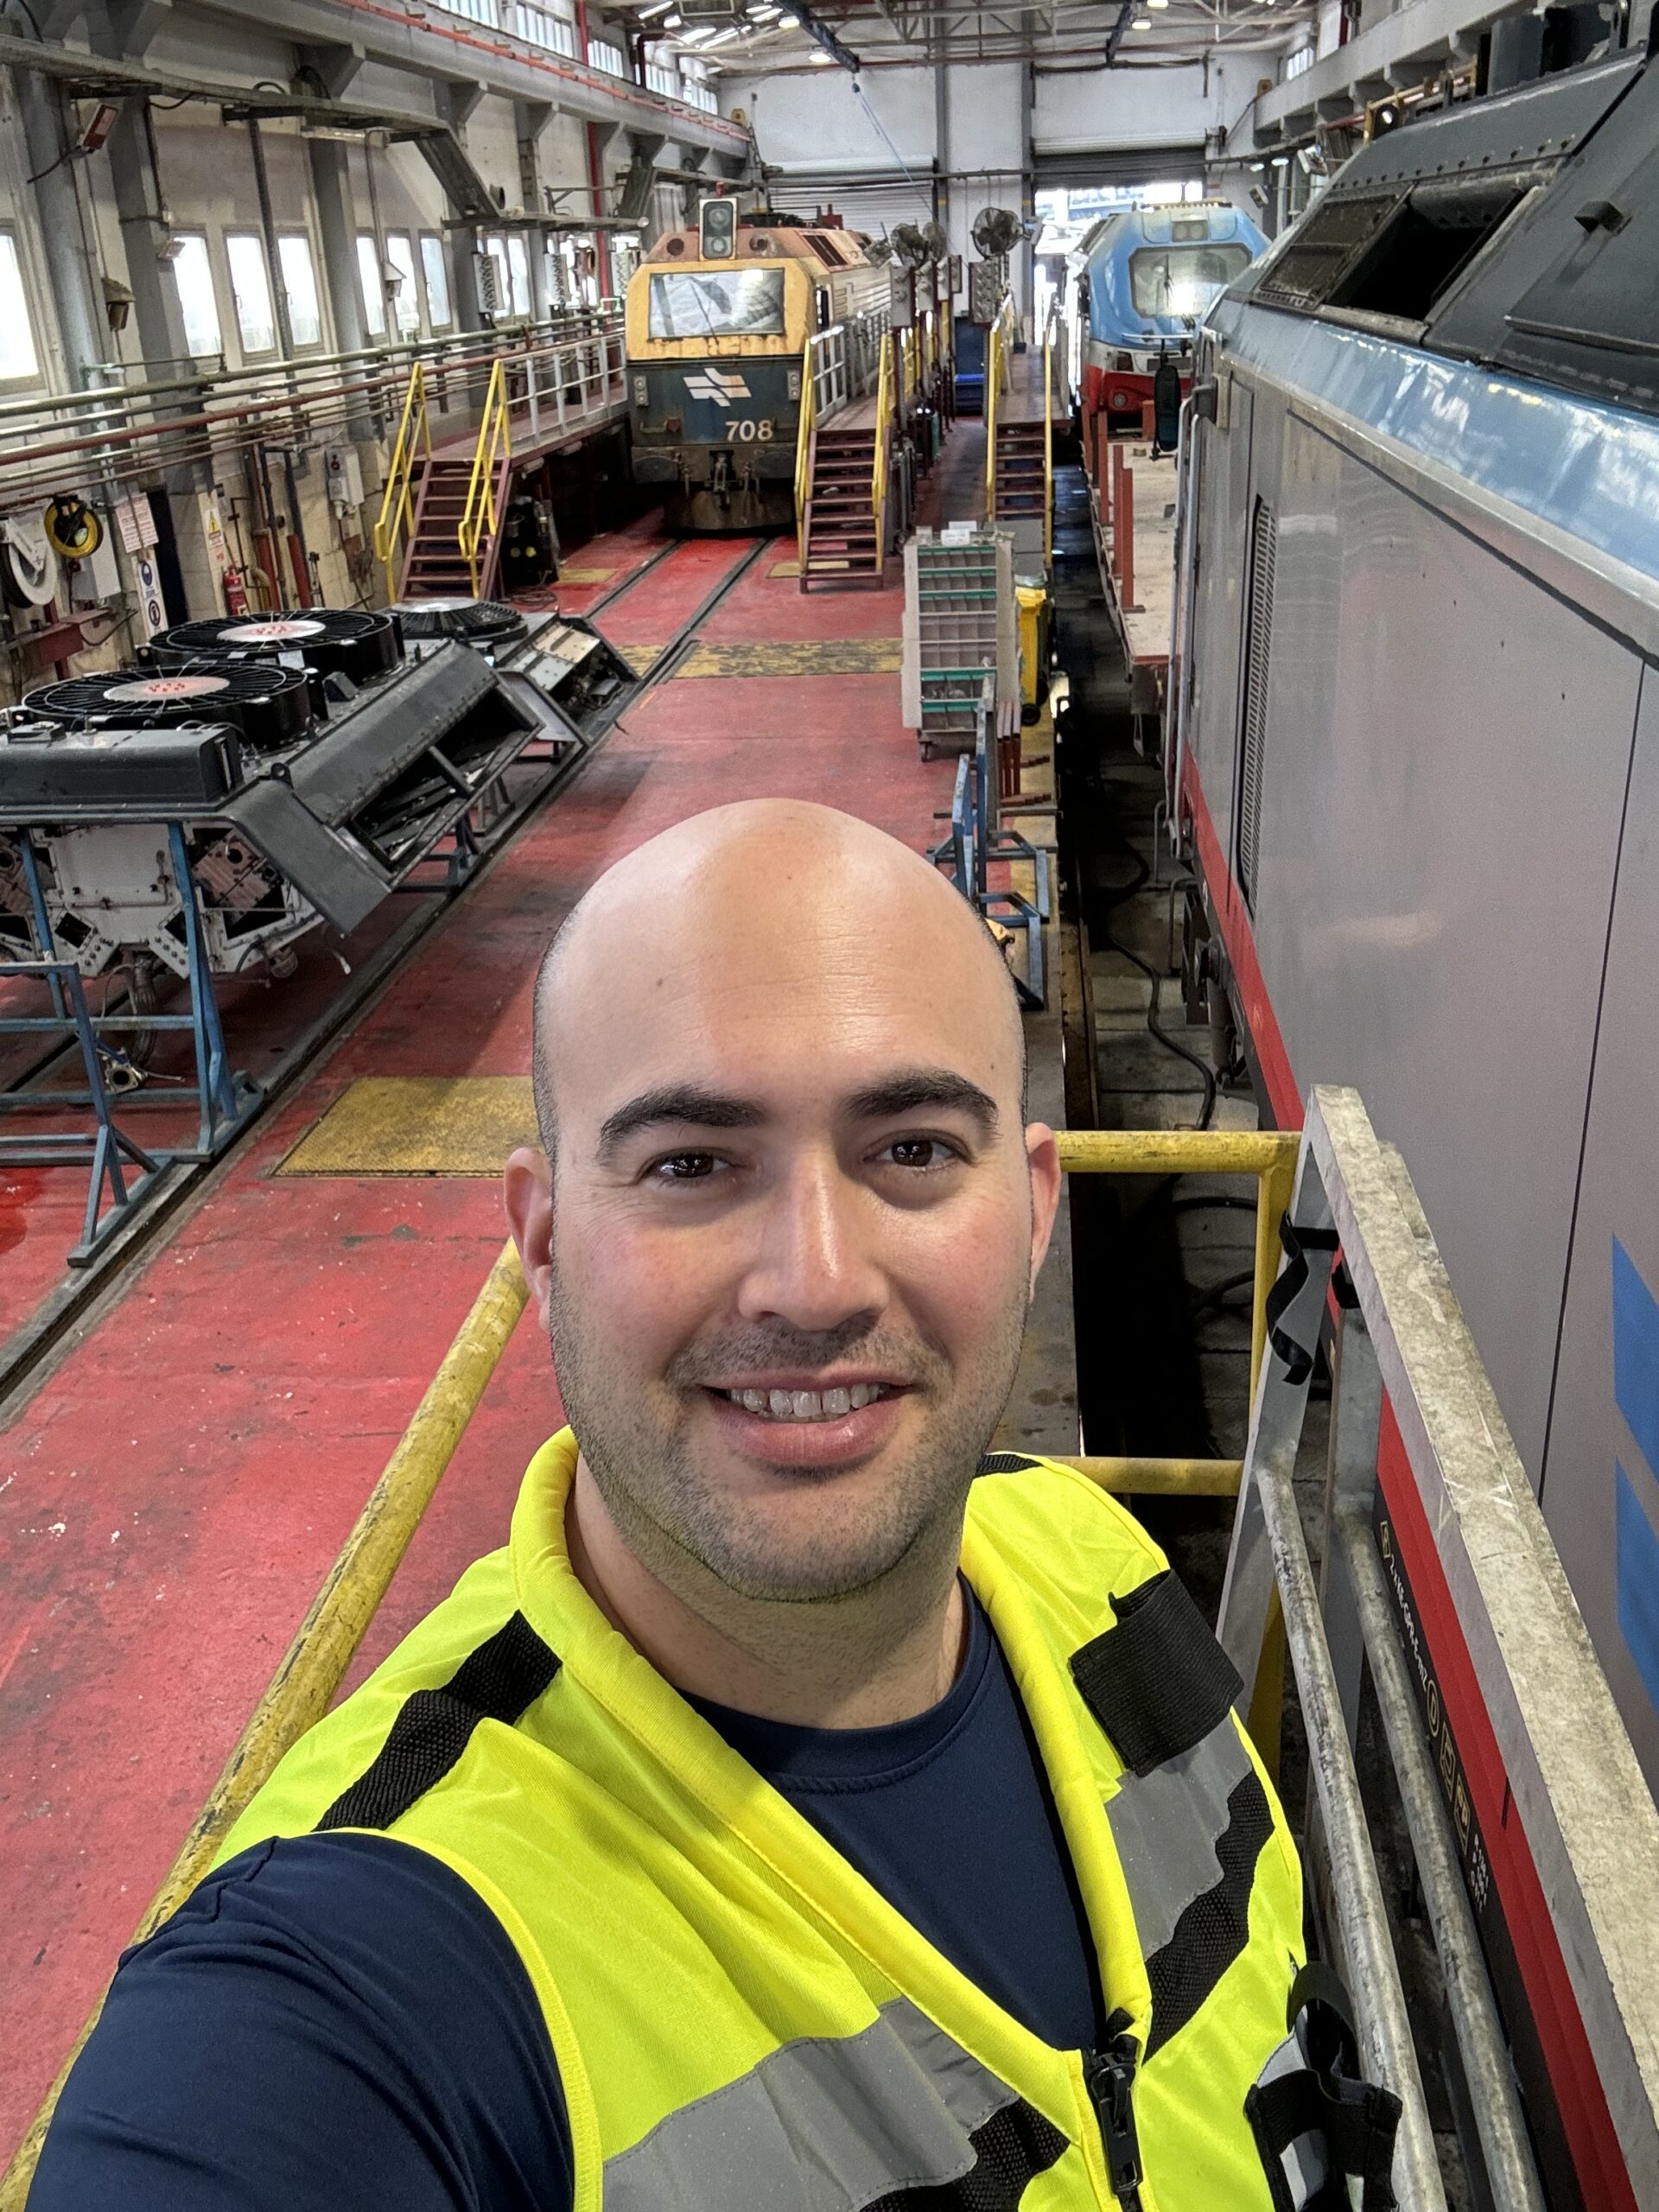 Man in high visibility vest taking a selfie in a train maintenance facility.